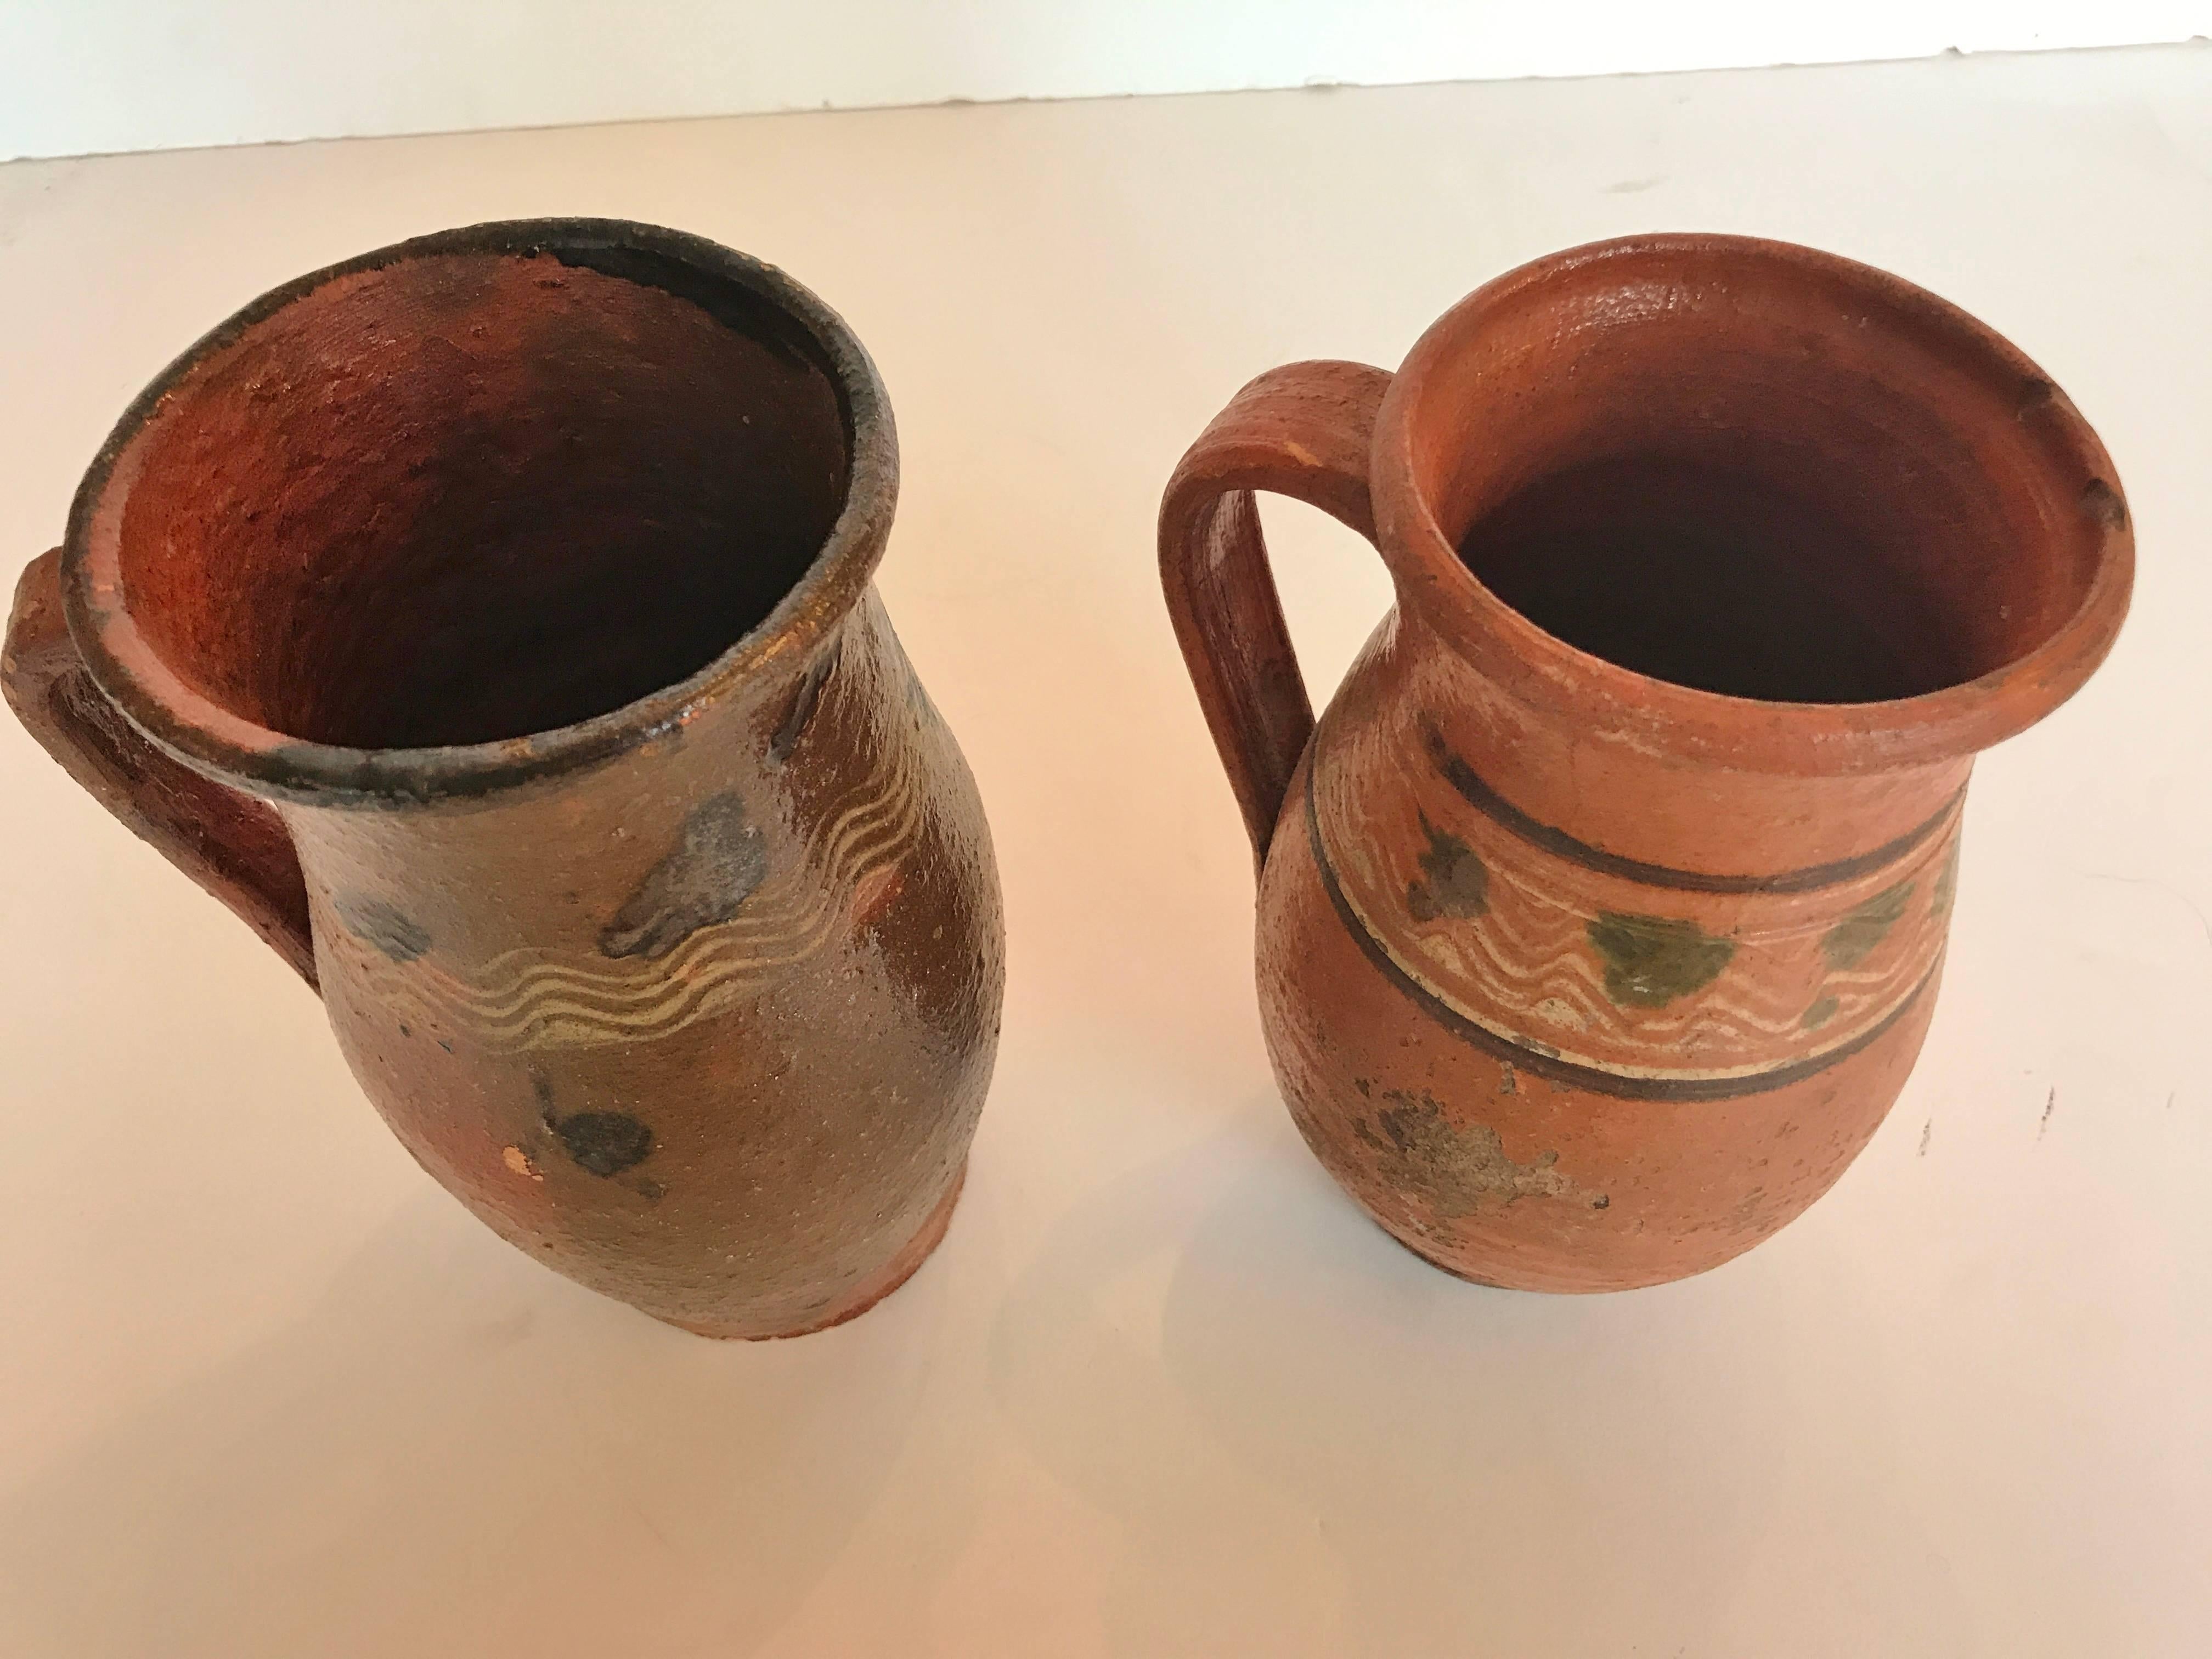 20th Century Vintage Transylvania Redware Pottery Pitchers, Romania, Hand-Painted, Folk Art For Sale